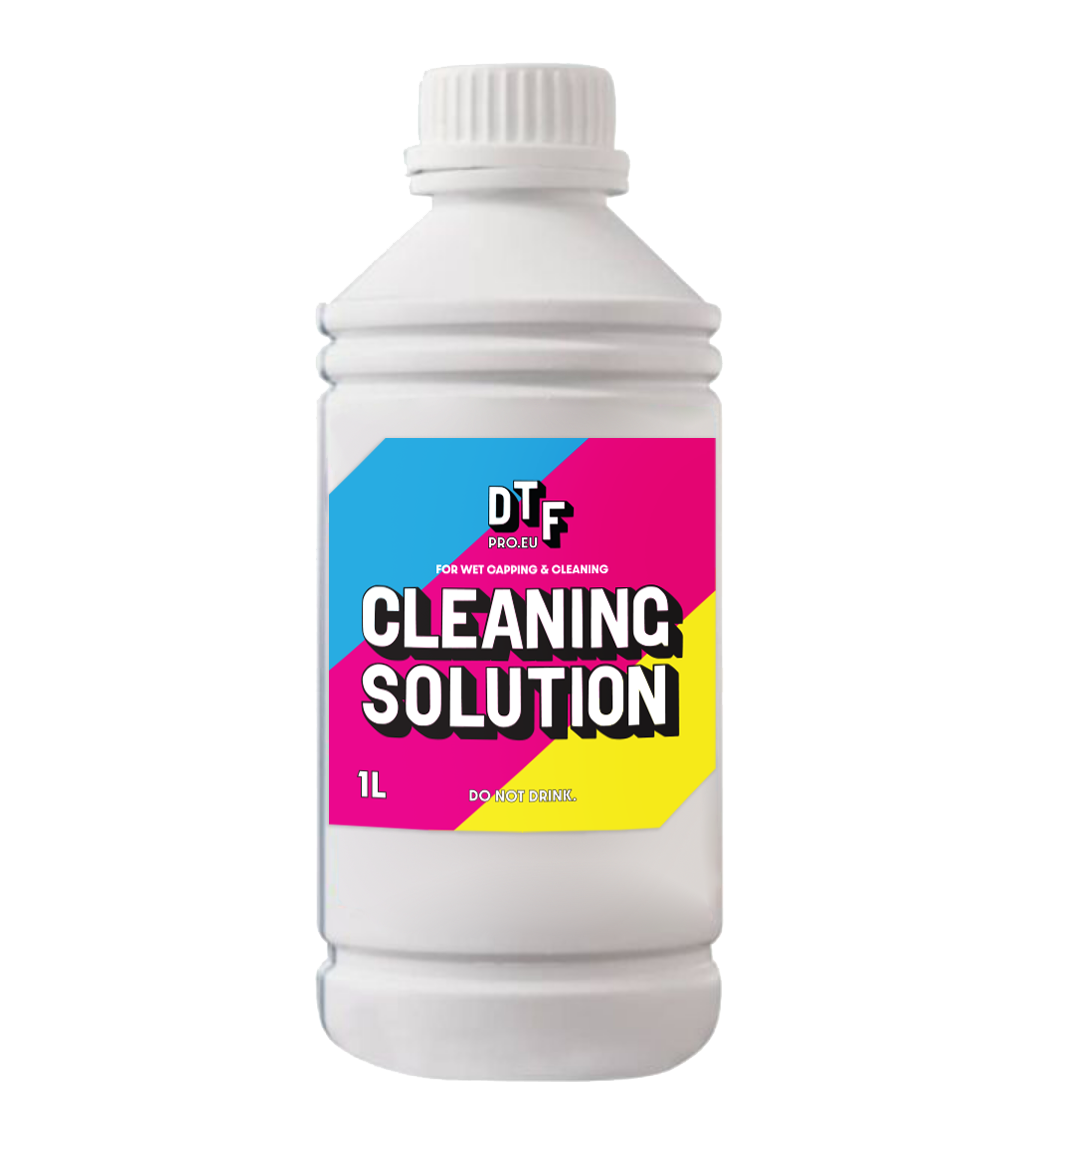 DTFPRO Cleaning Solution 1L